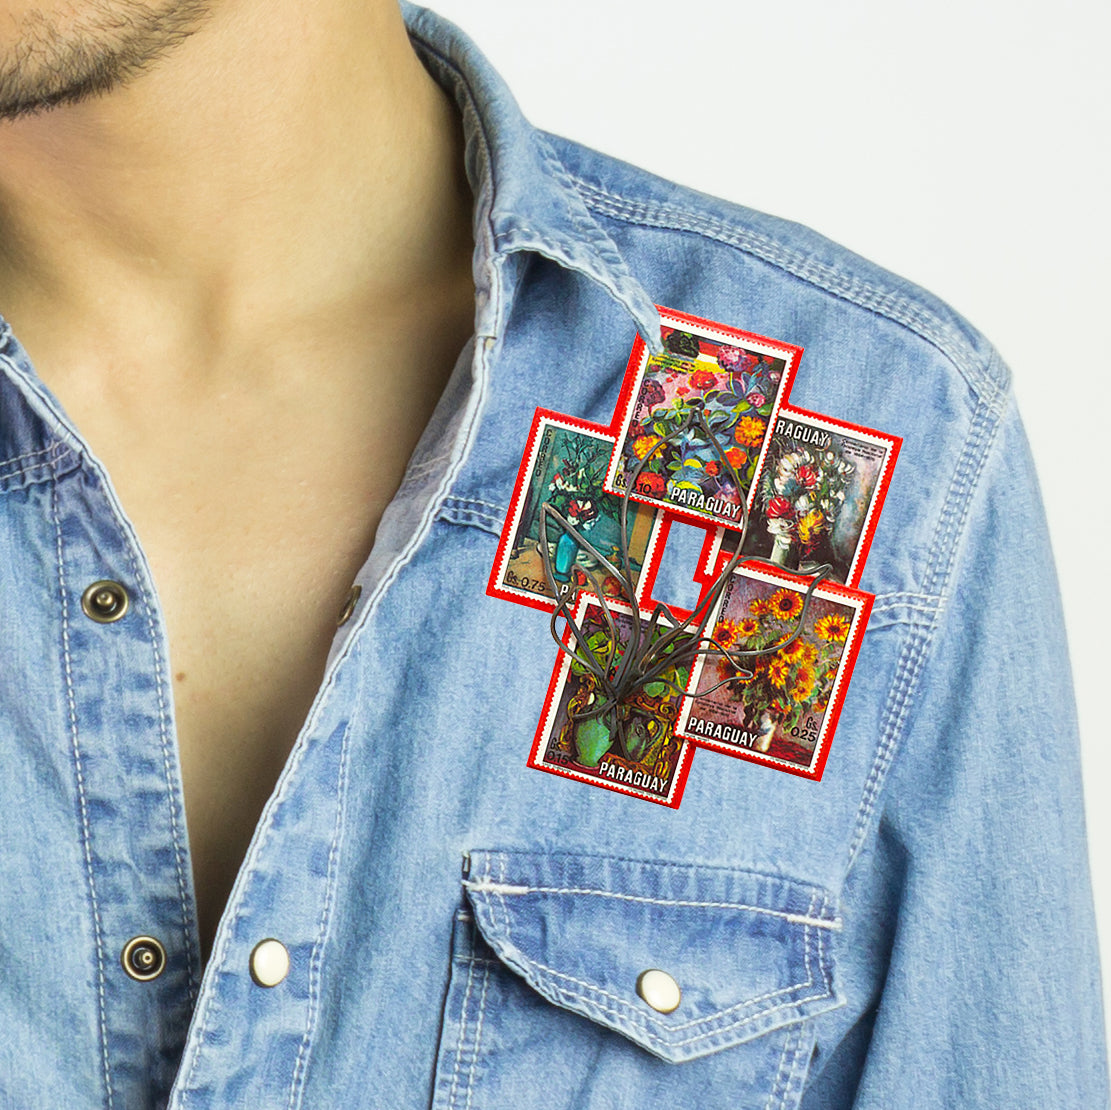 A red brooch featuring colorful postage stamps from Paraguay arranged in a mosaic-like pattern depicting various paintings of flowers by French artist Paul Cézanne. The brooch challenges traditional jewelry values and highlights social and political themes of currency and material use.